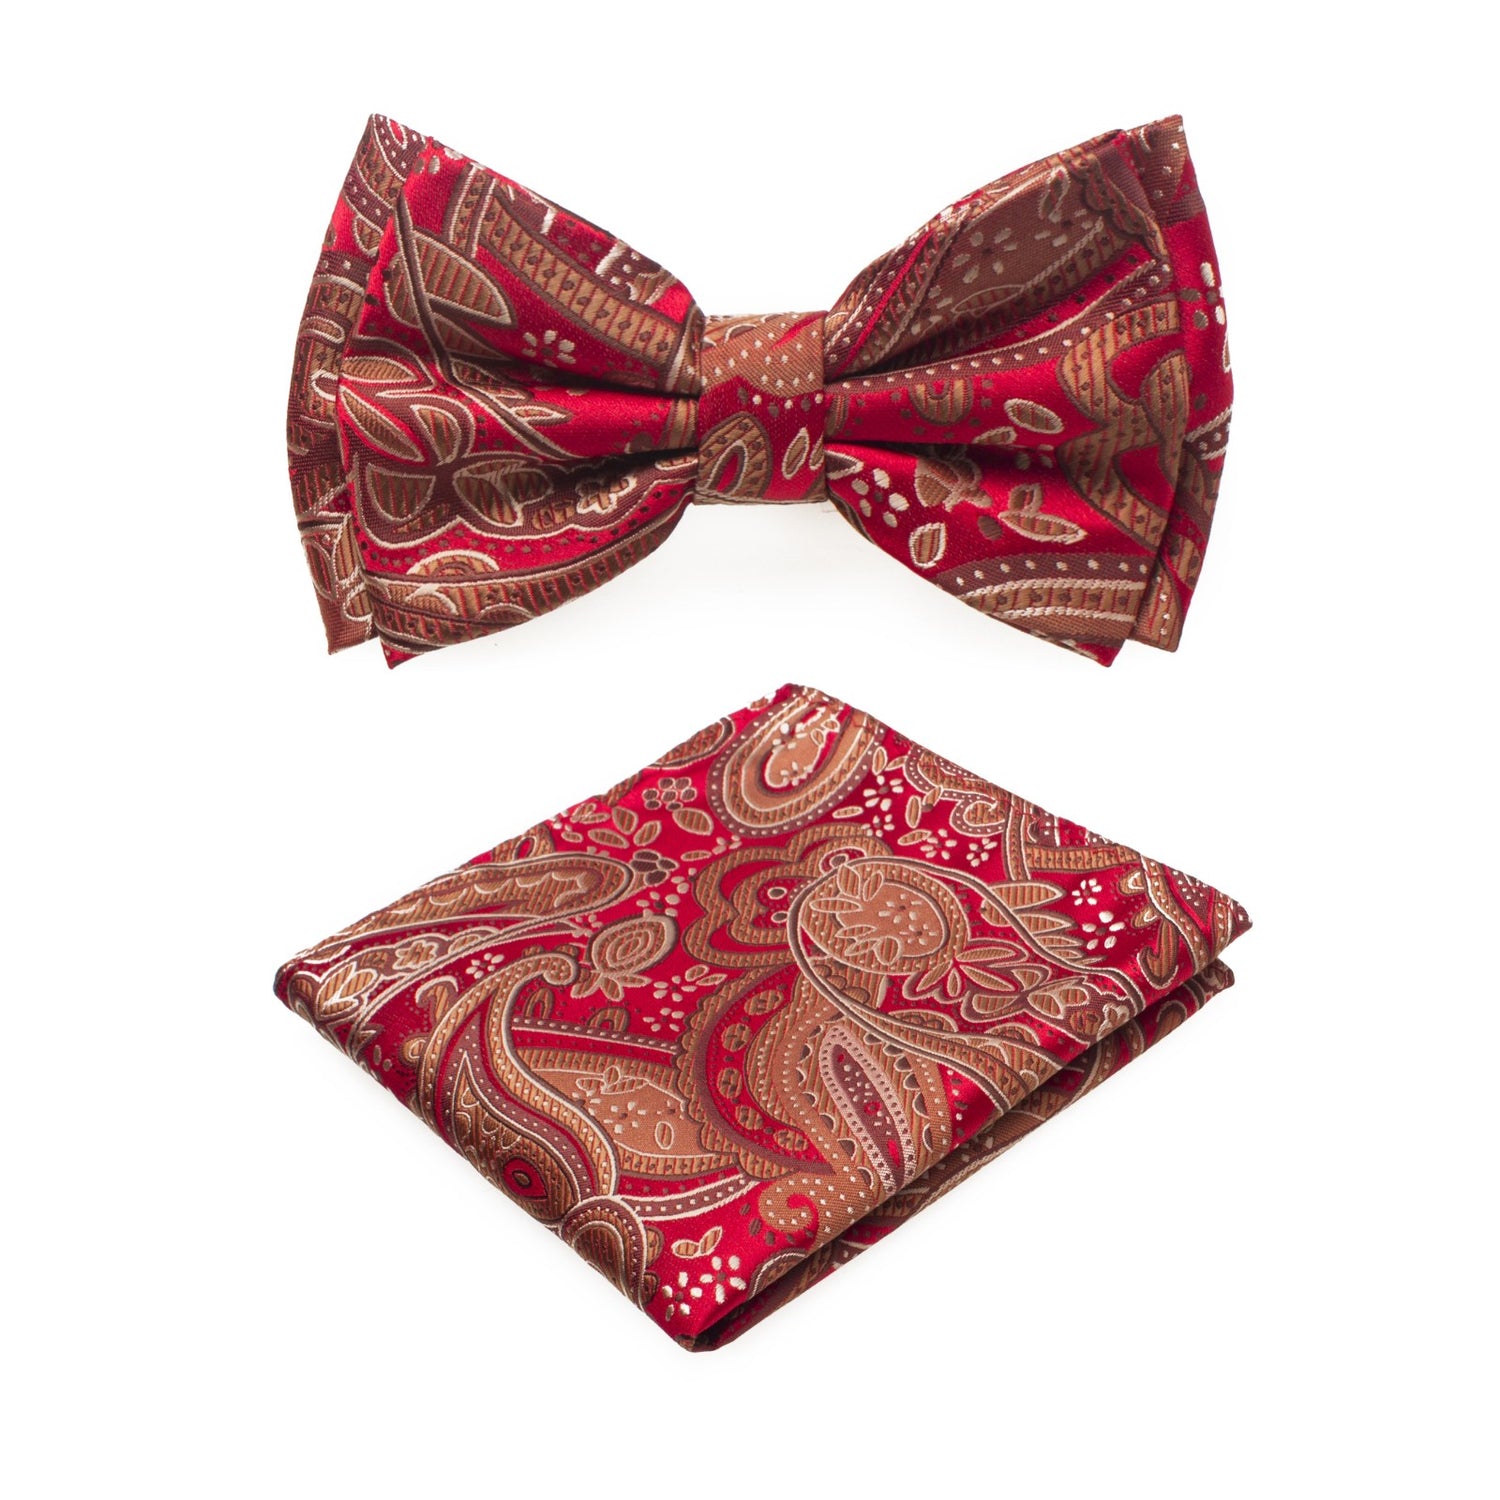 Main View: A Deep Red, Brown Color With Paisley Pattern Silk Kids Pre-Tied Bow Tie, Matching Pocket Square